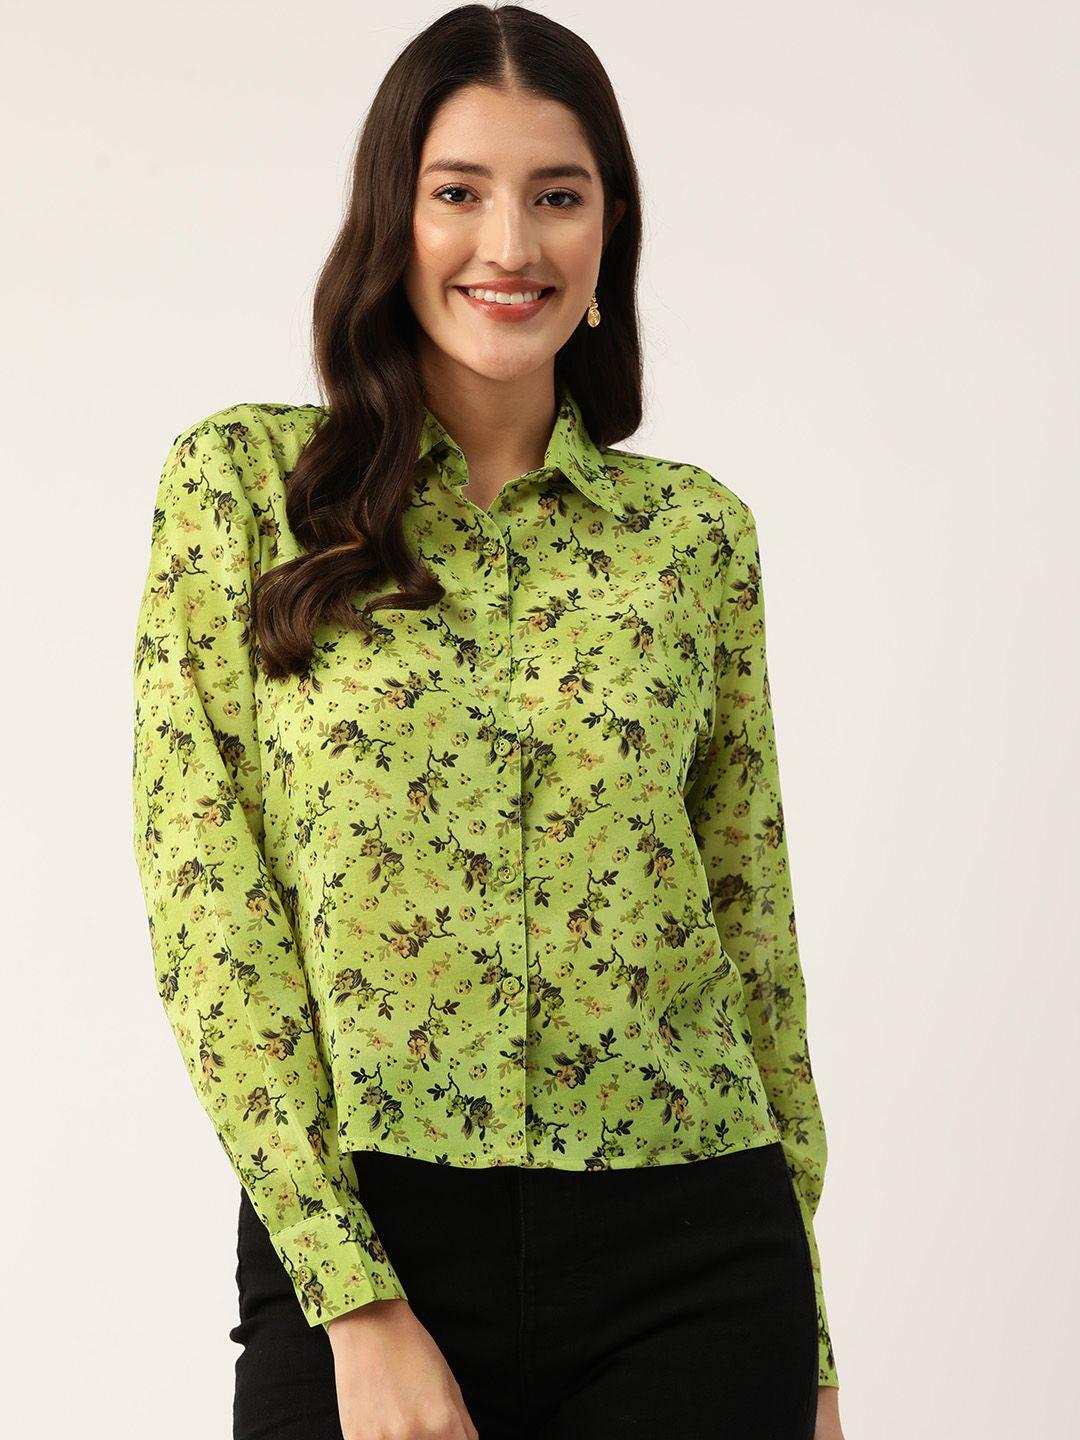 slenor-women-floral-opaque-printed-casual-shirt